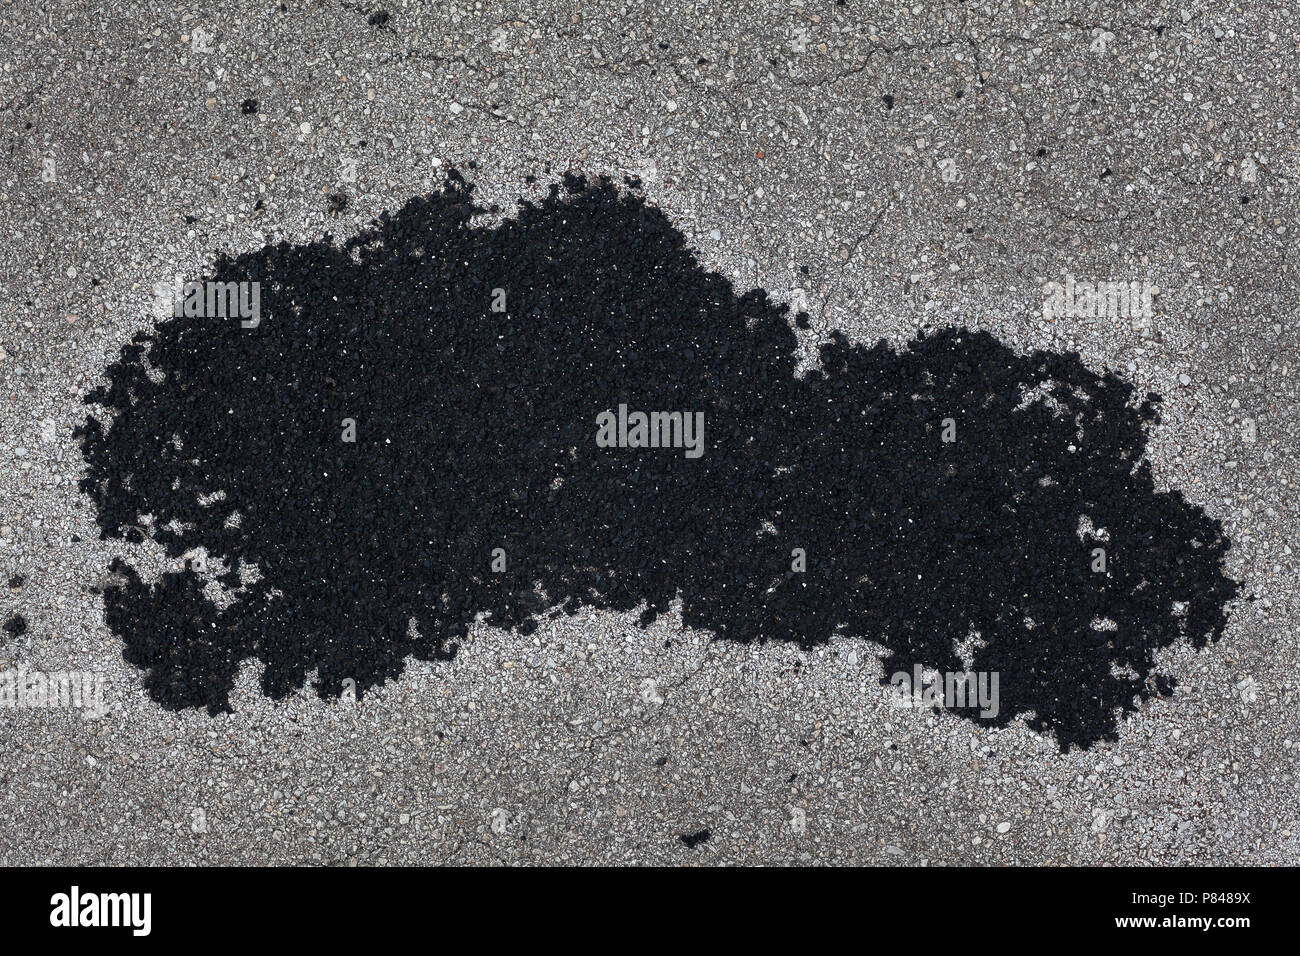 Closeup view of old obsolete asphalt, black and gray gravel details. Stock Photo